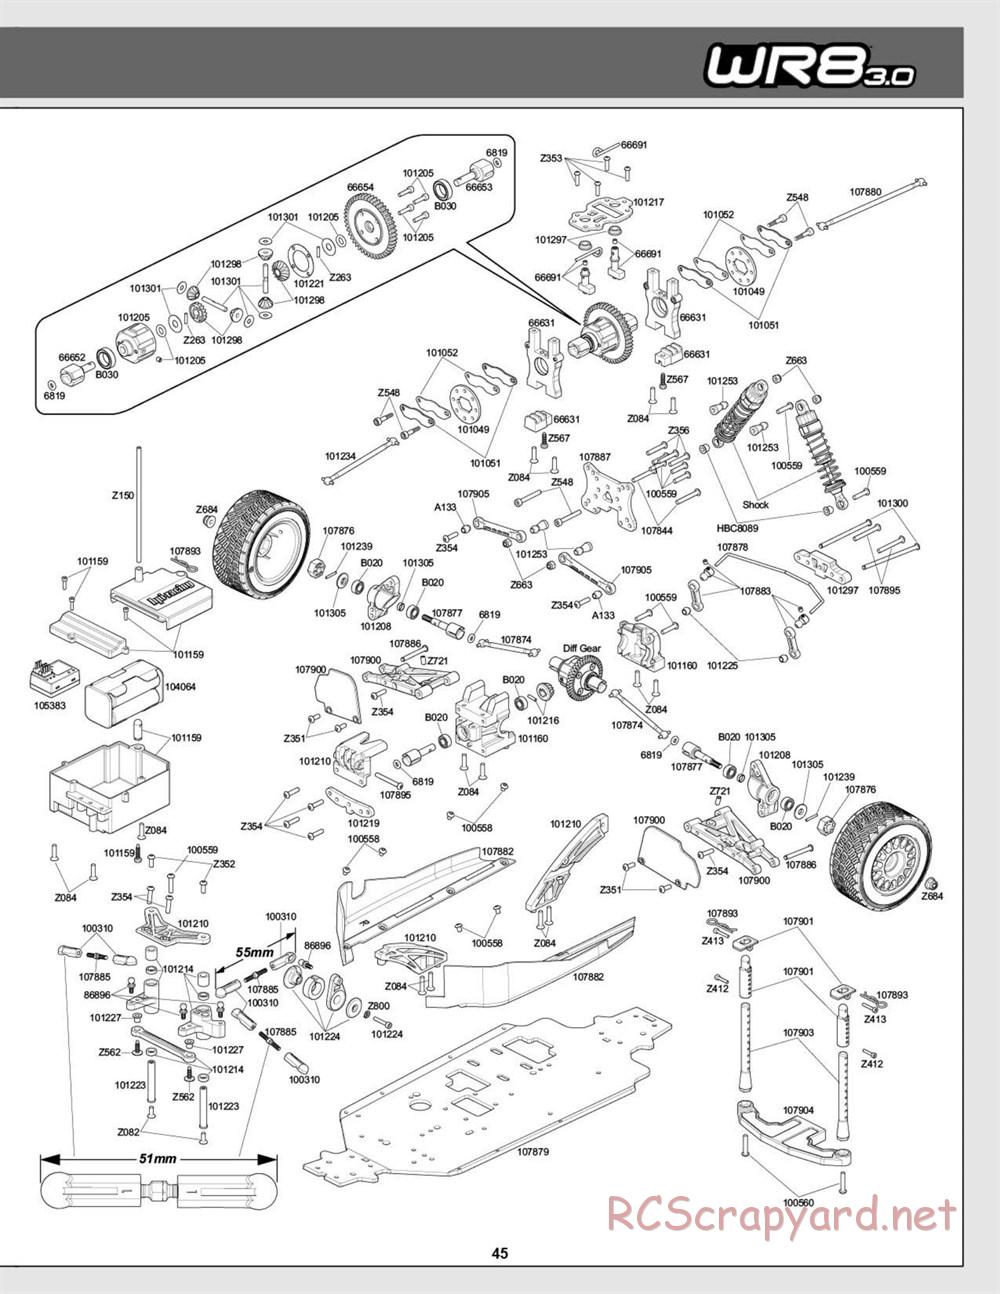 HPI - WR8 3.0 - Exploded View - Page 45